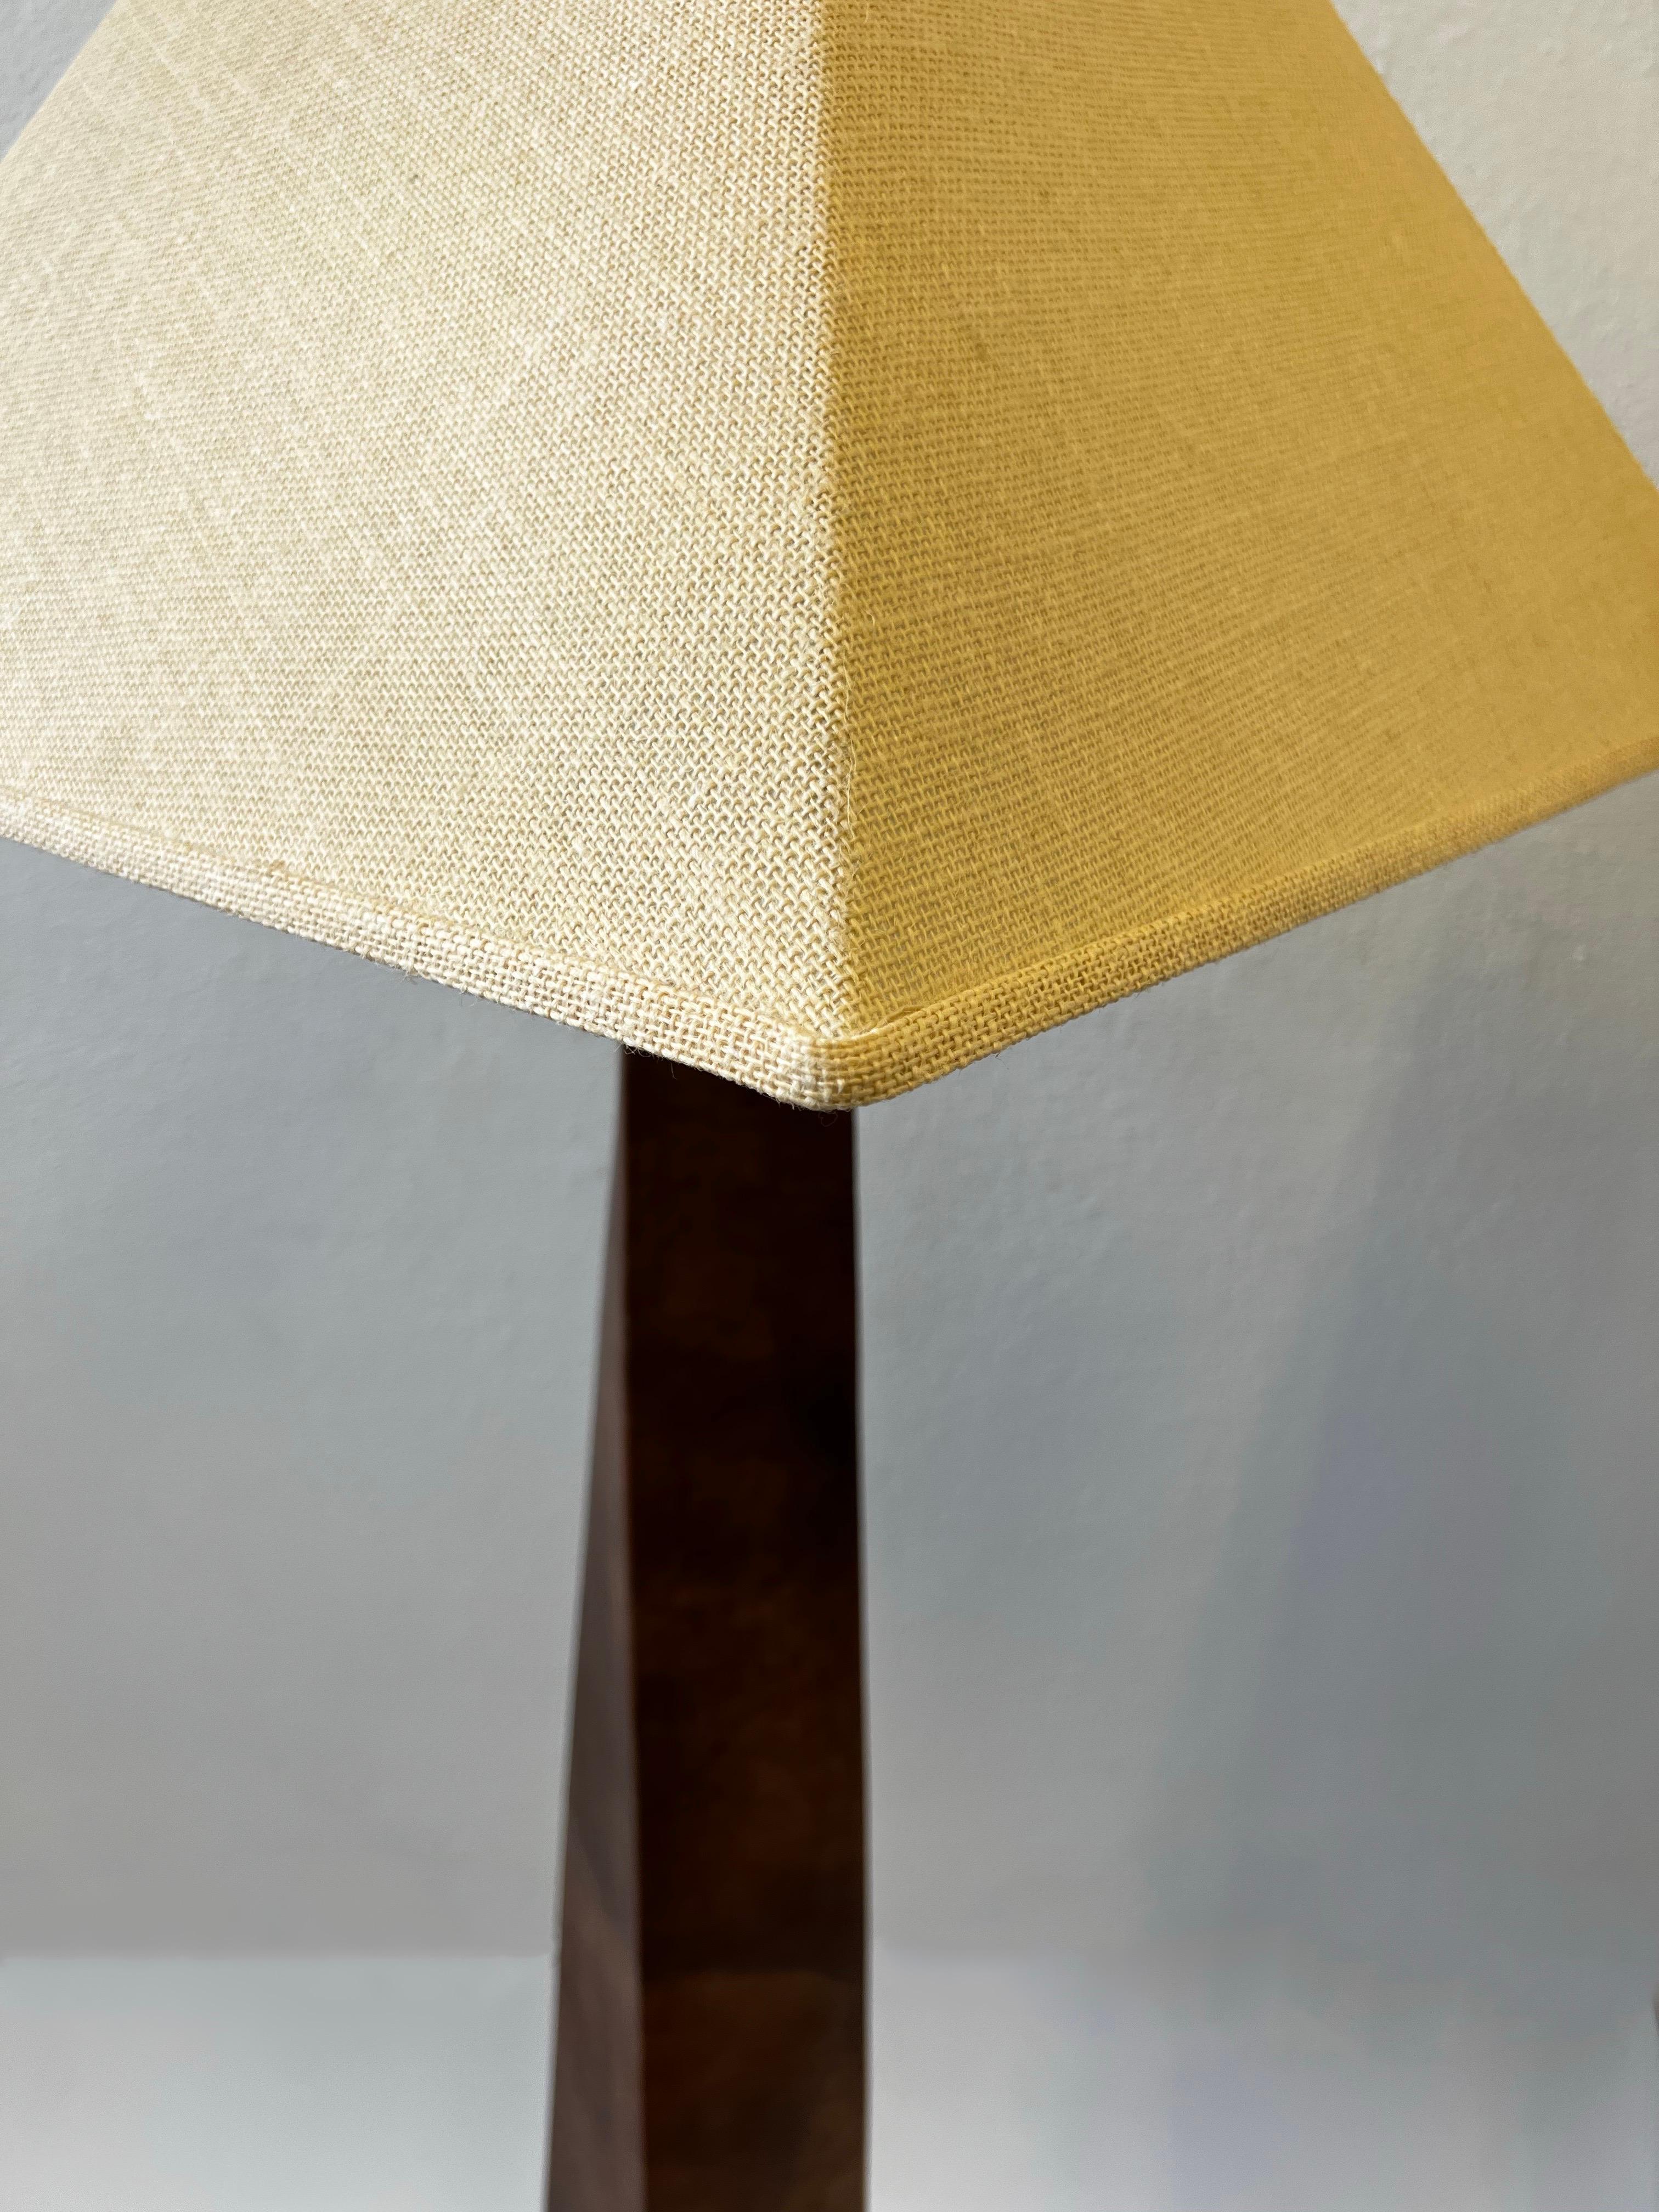 Pair of Leather and Brass Floor Lamps by Karl Springer  For Sale 2